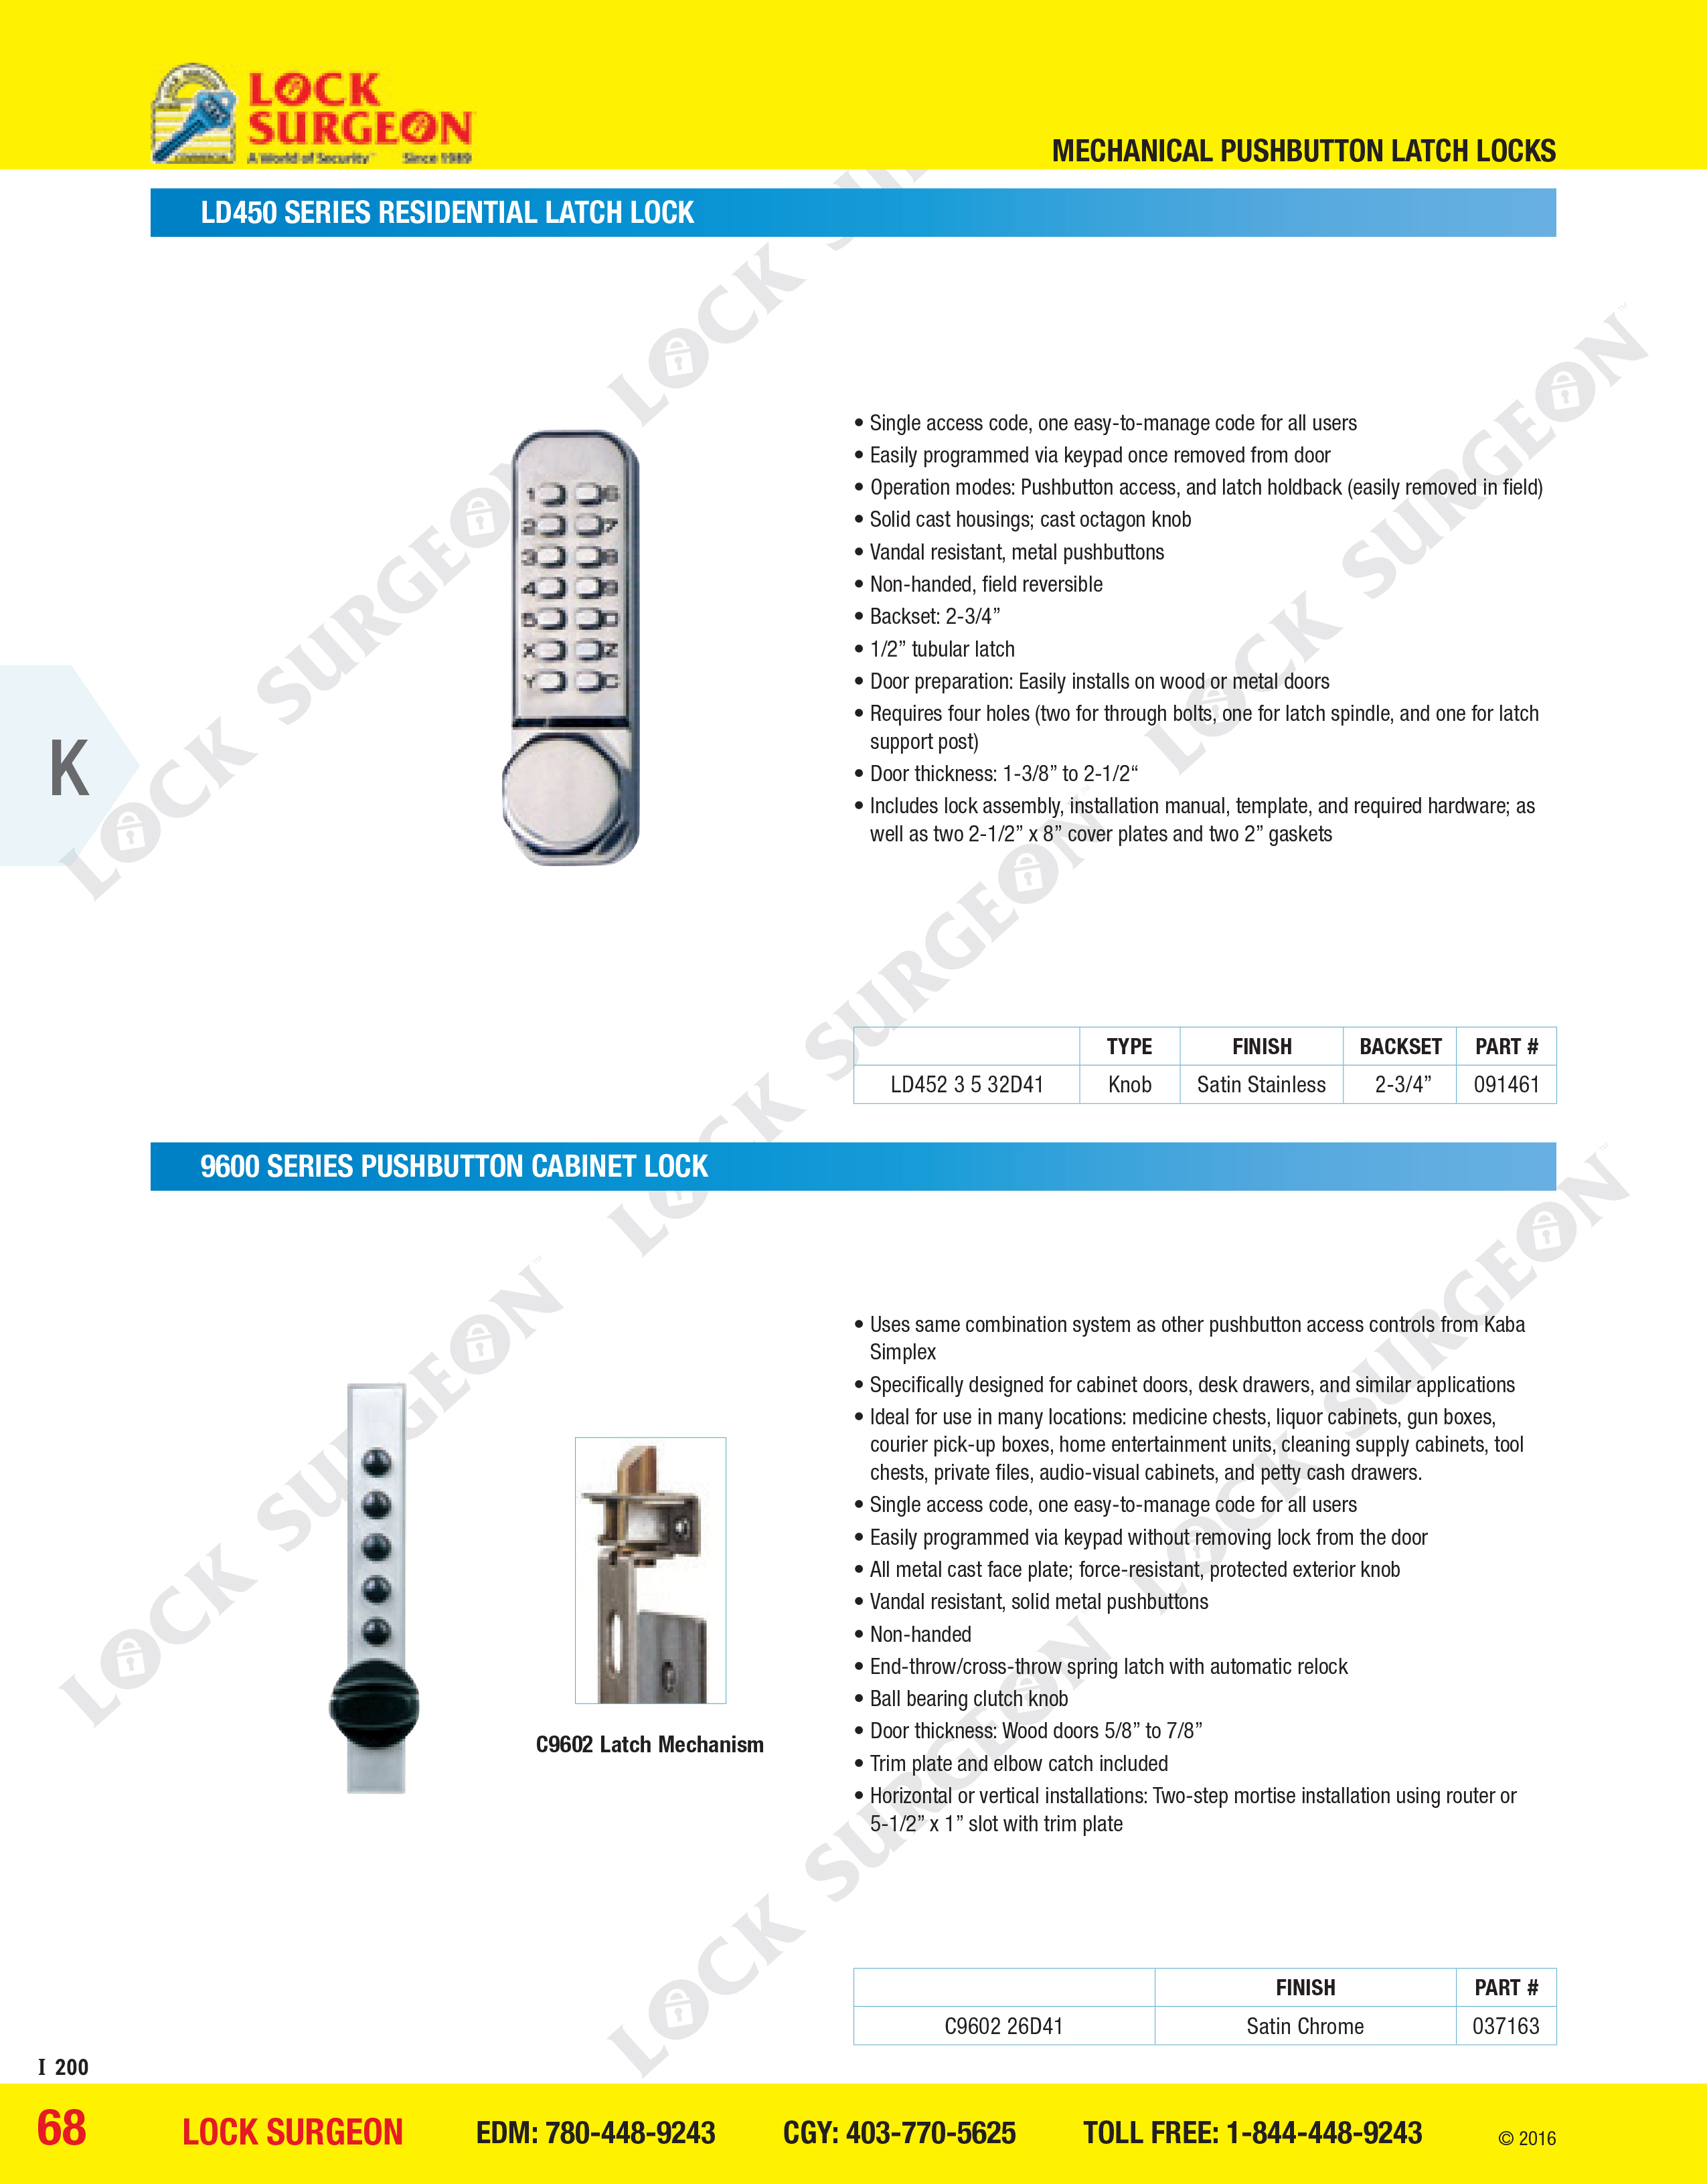 Mini push-button entry push-button cabinet locks and digital cabinet entries.